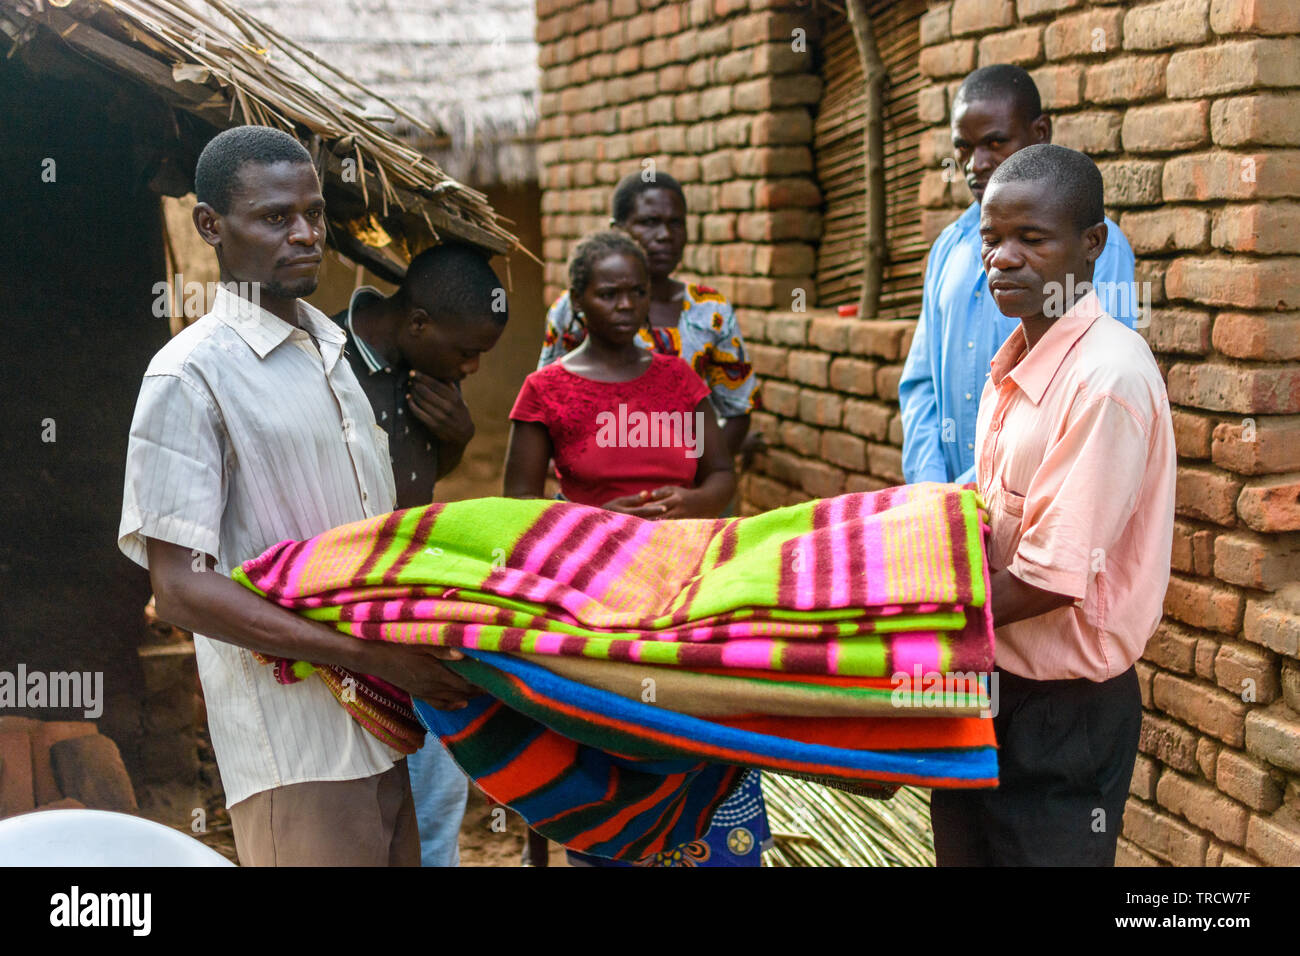 men carry blankets donated to help the victims of cyclone Idai in Malawi Stock Photo